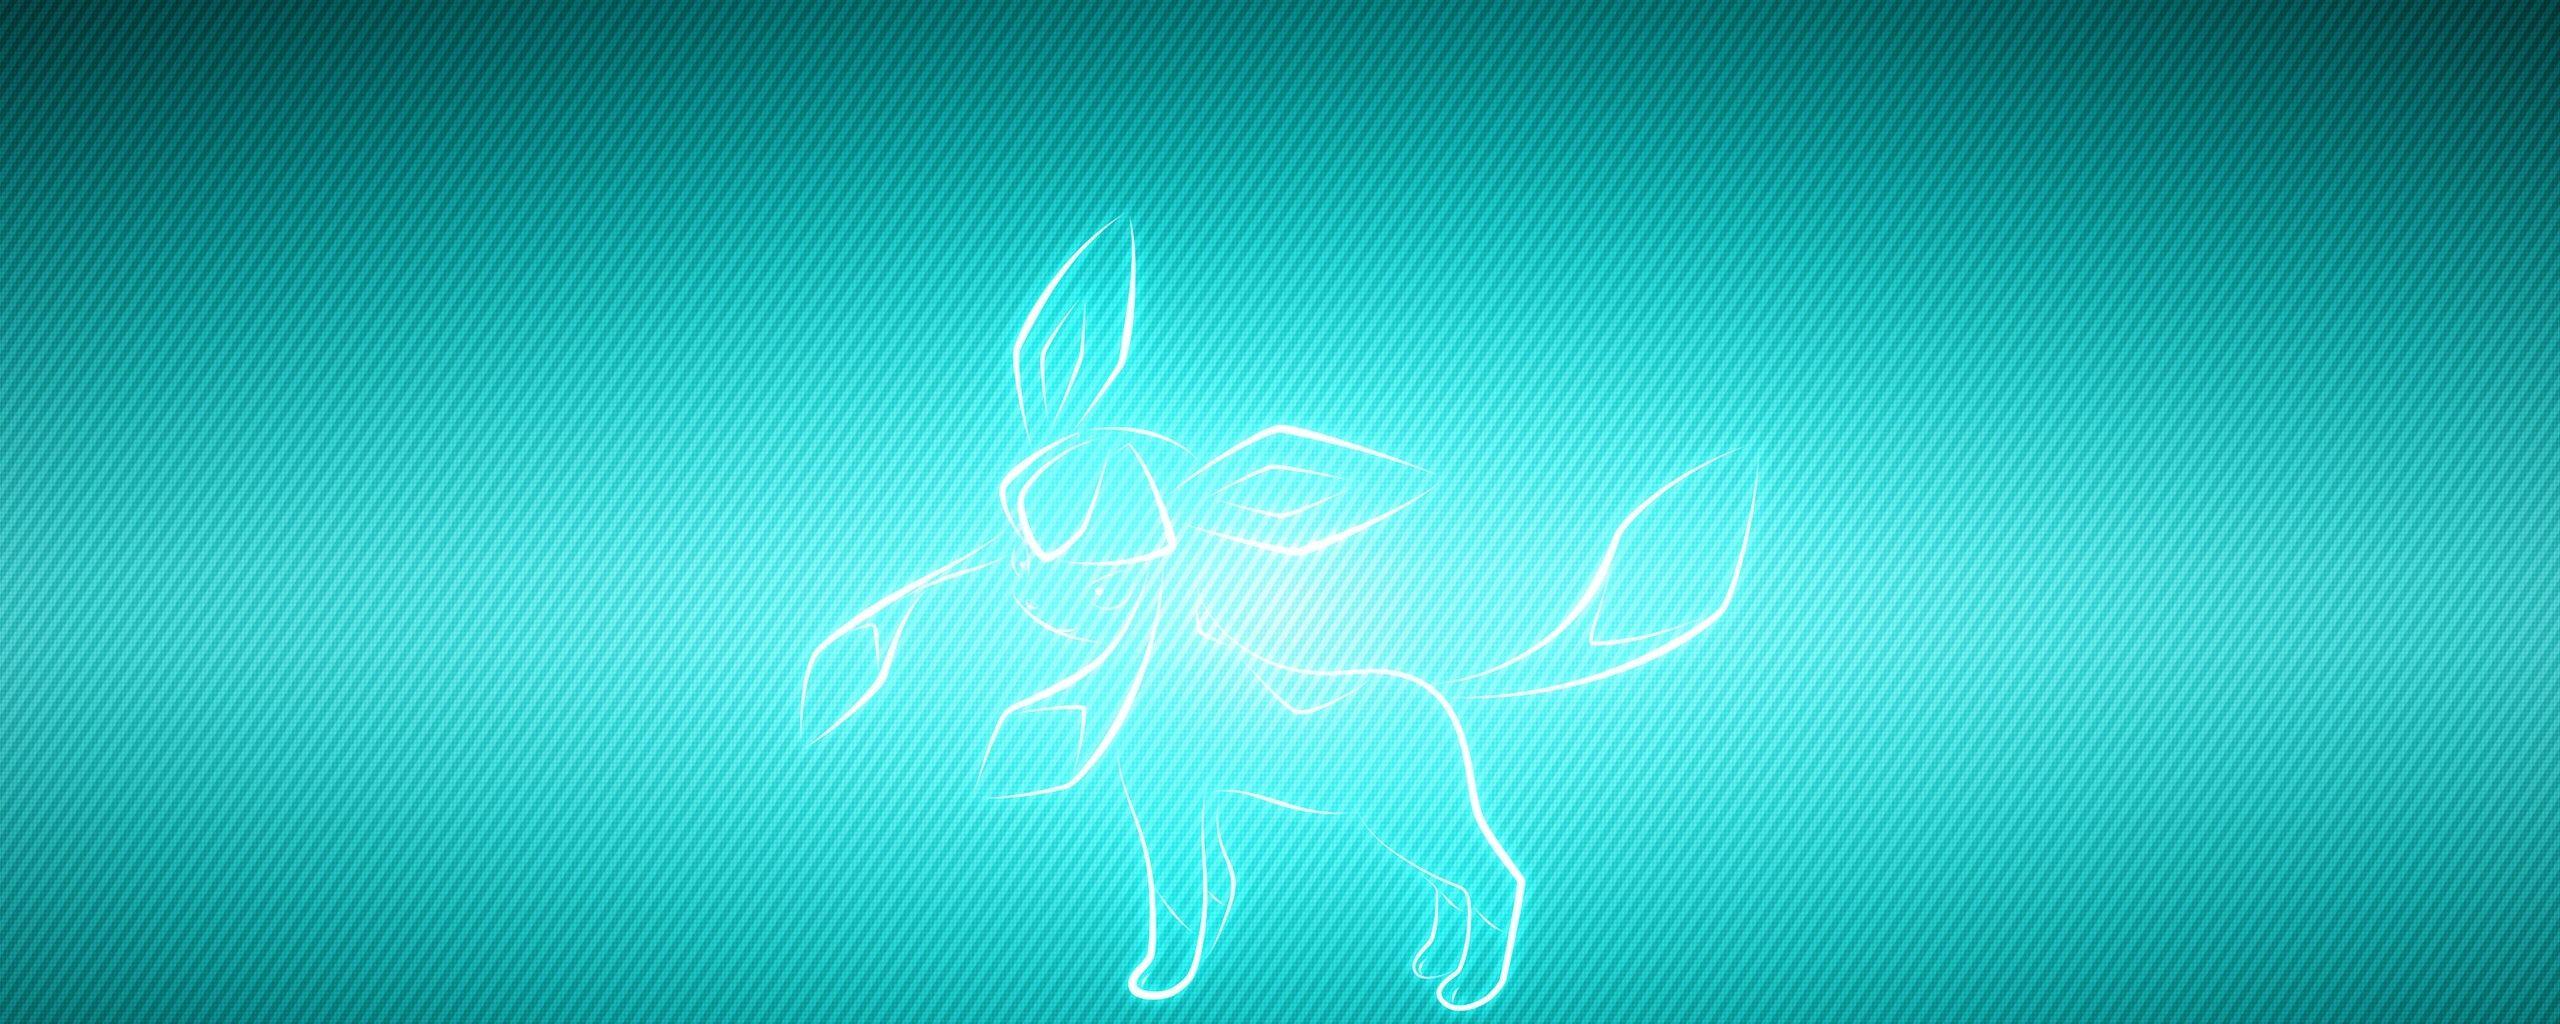 HDWP 50: Glaceon Wallpaper, Glaceon Collection Of Widescreen